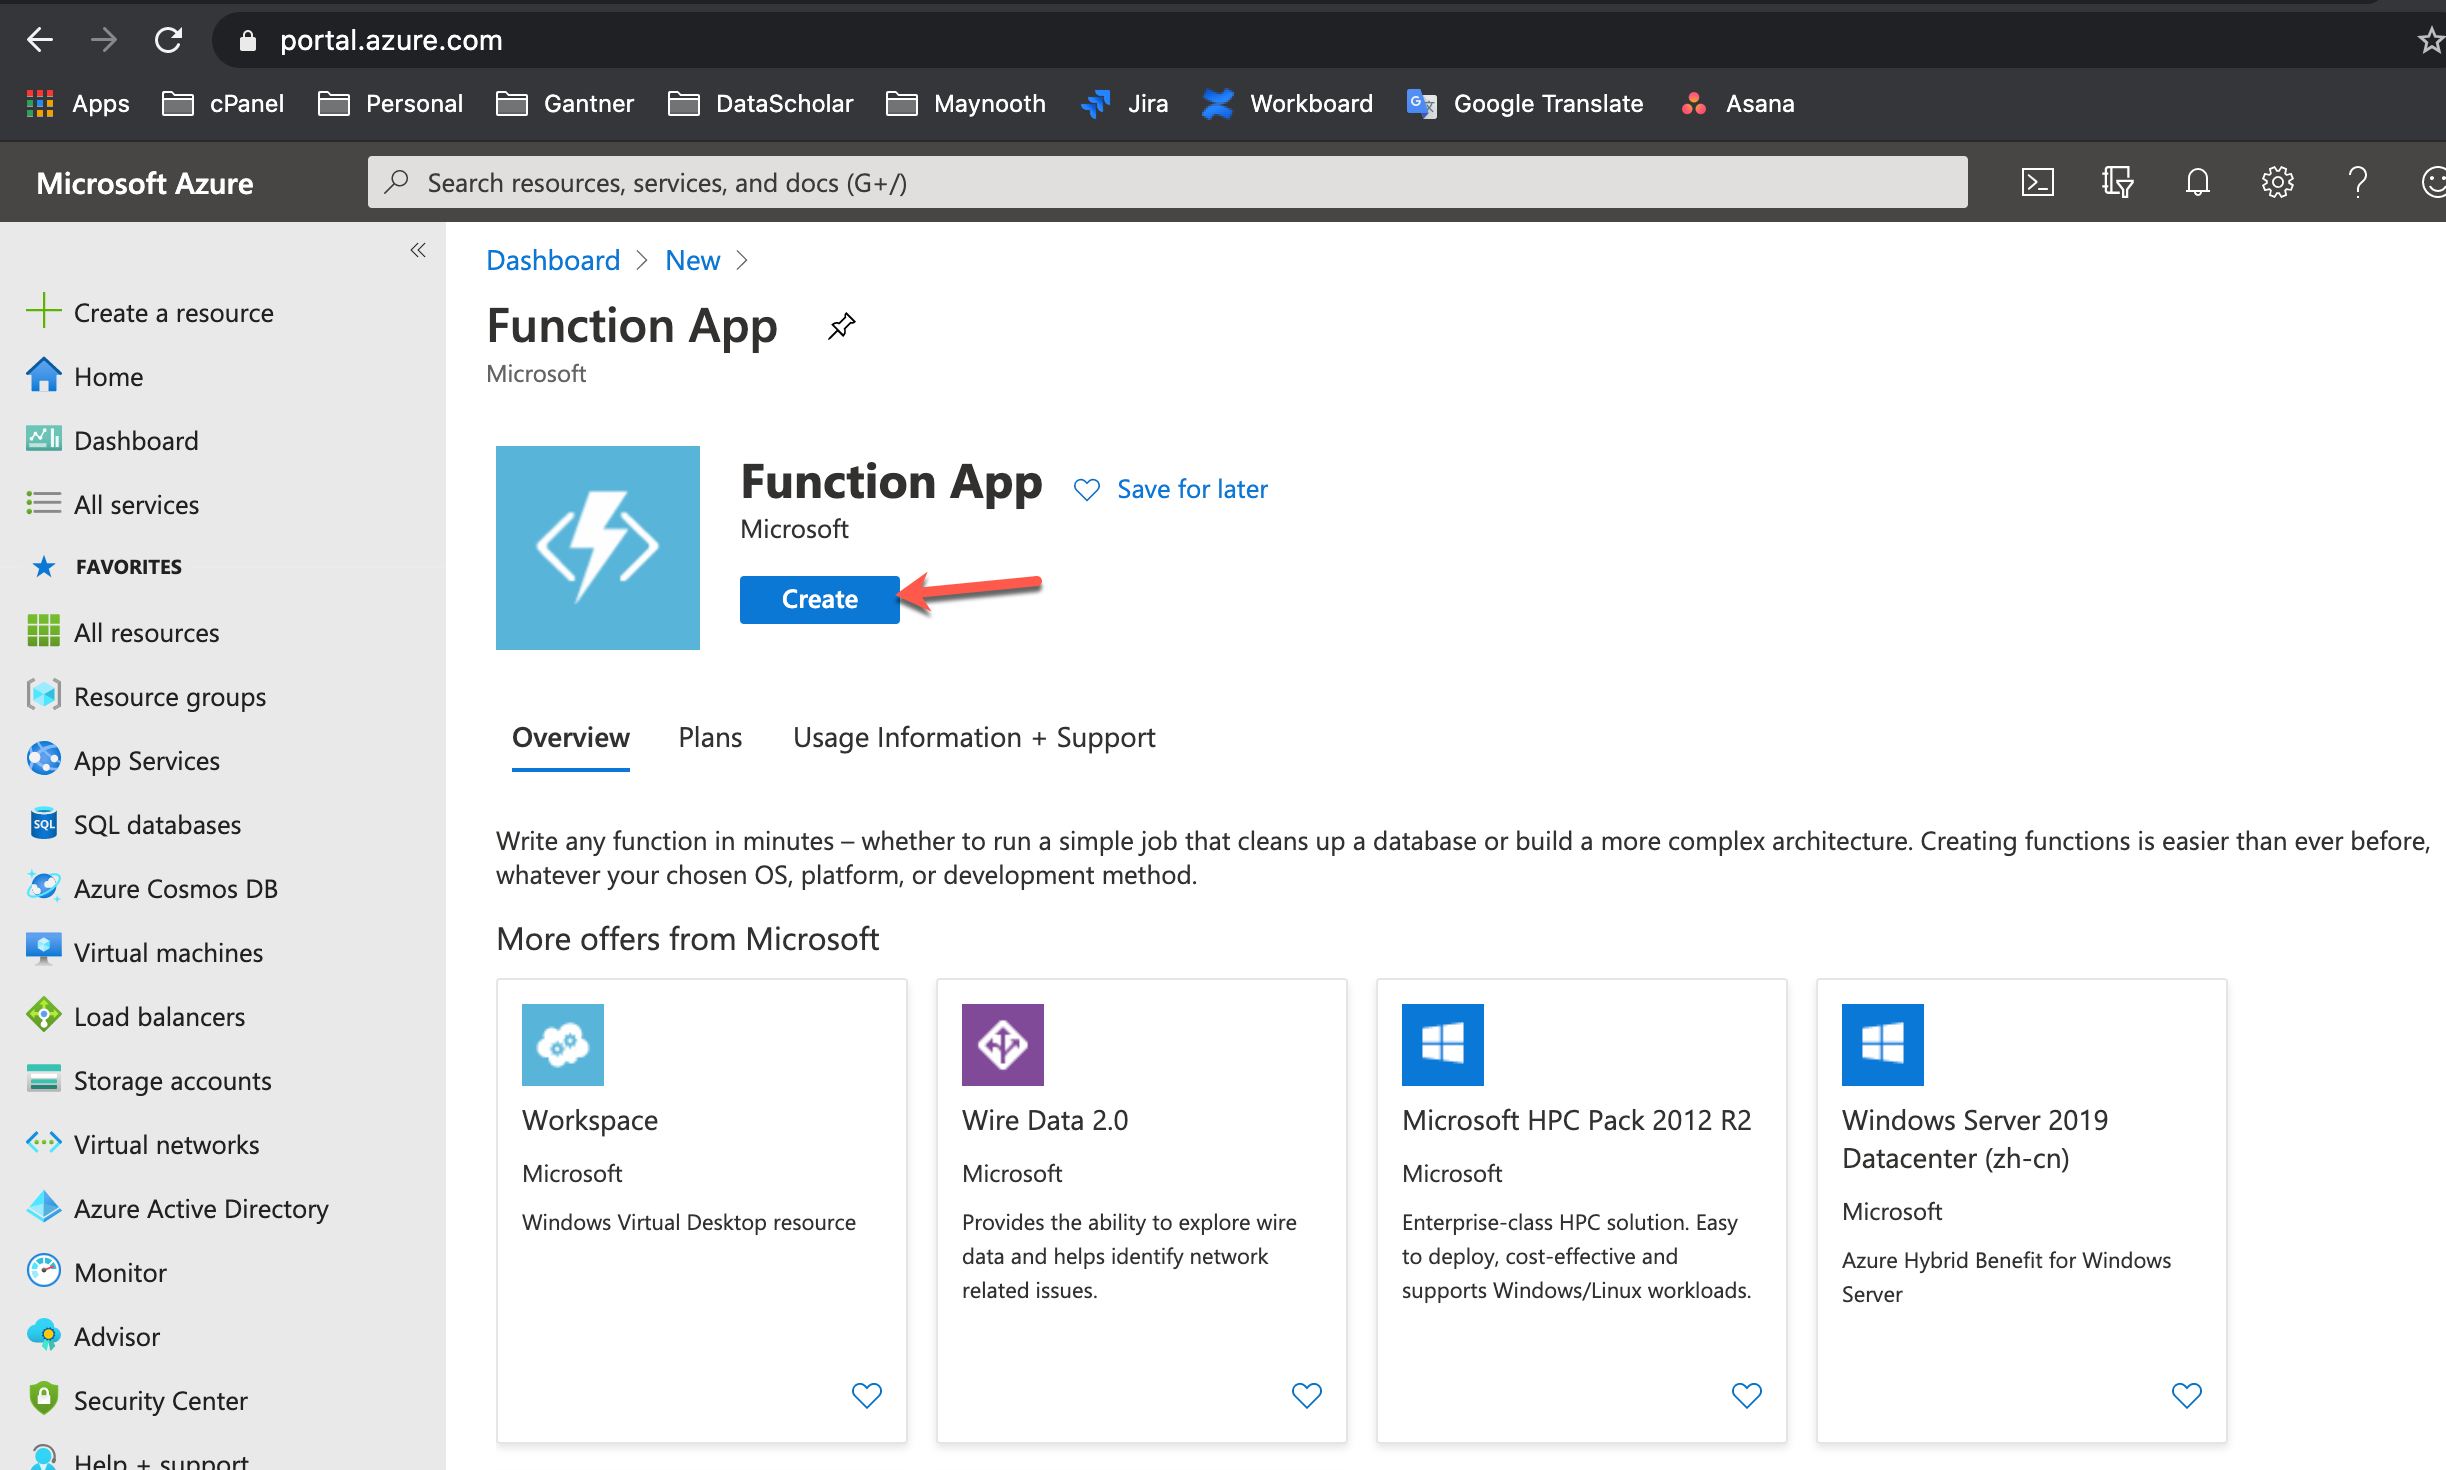 Creating the Azure Function App